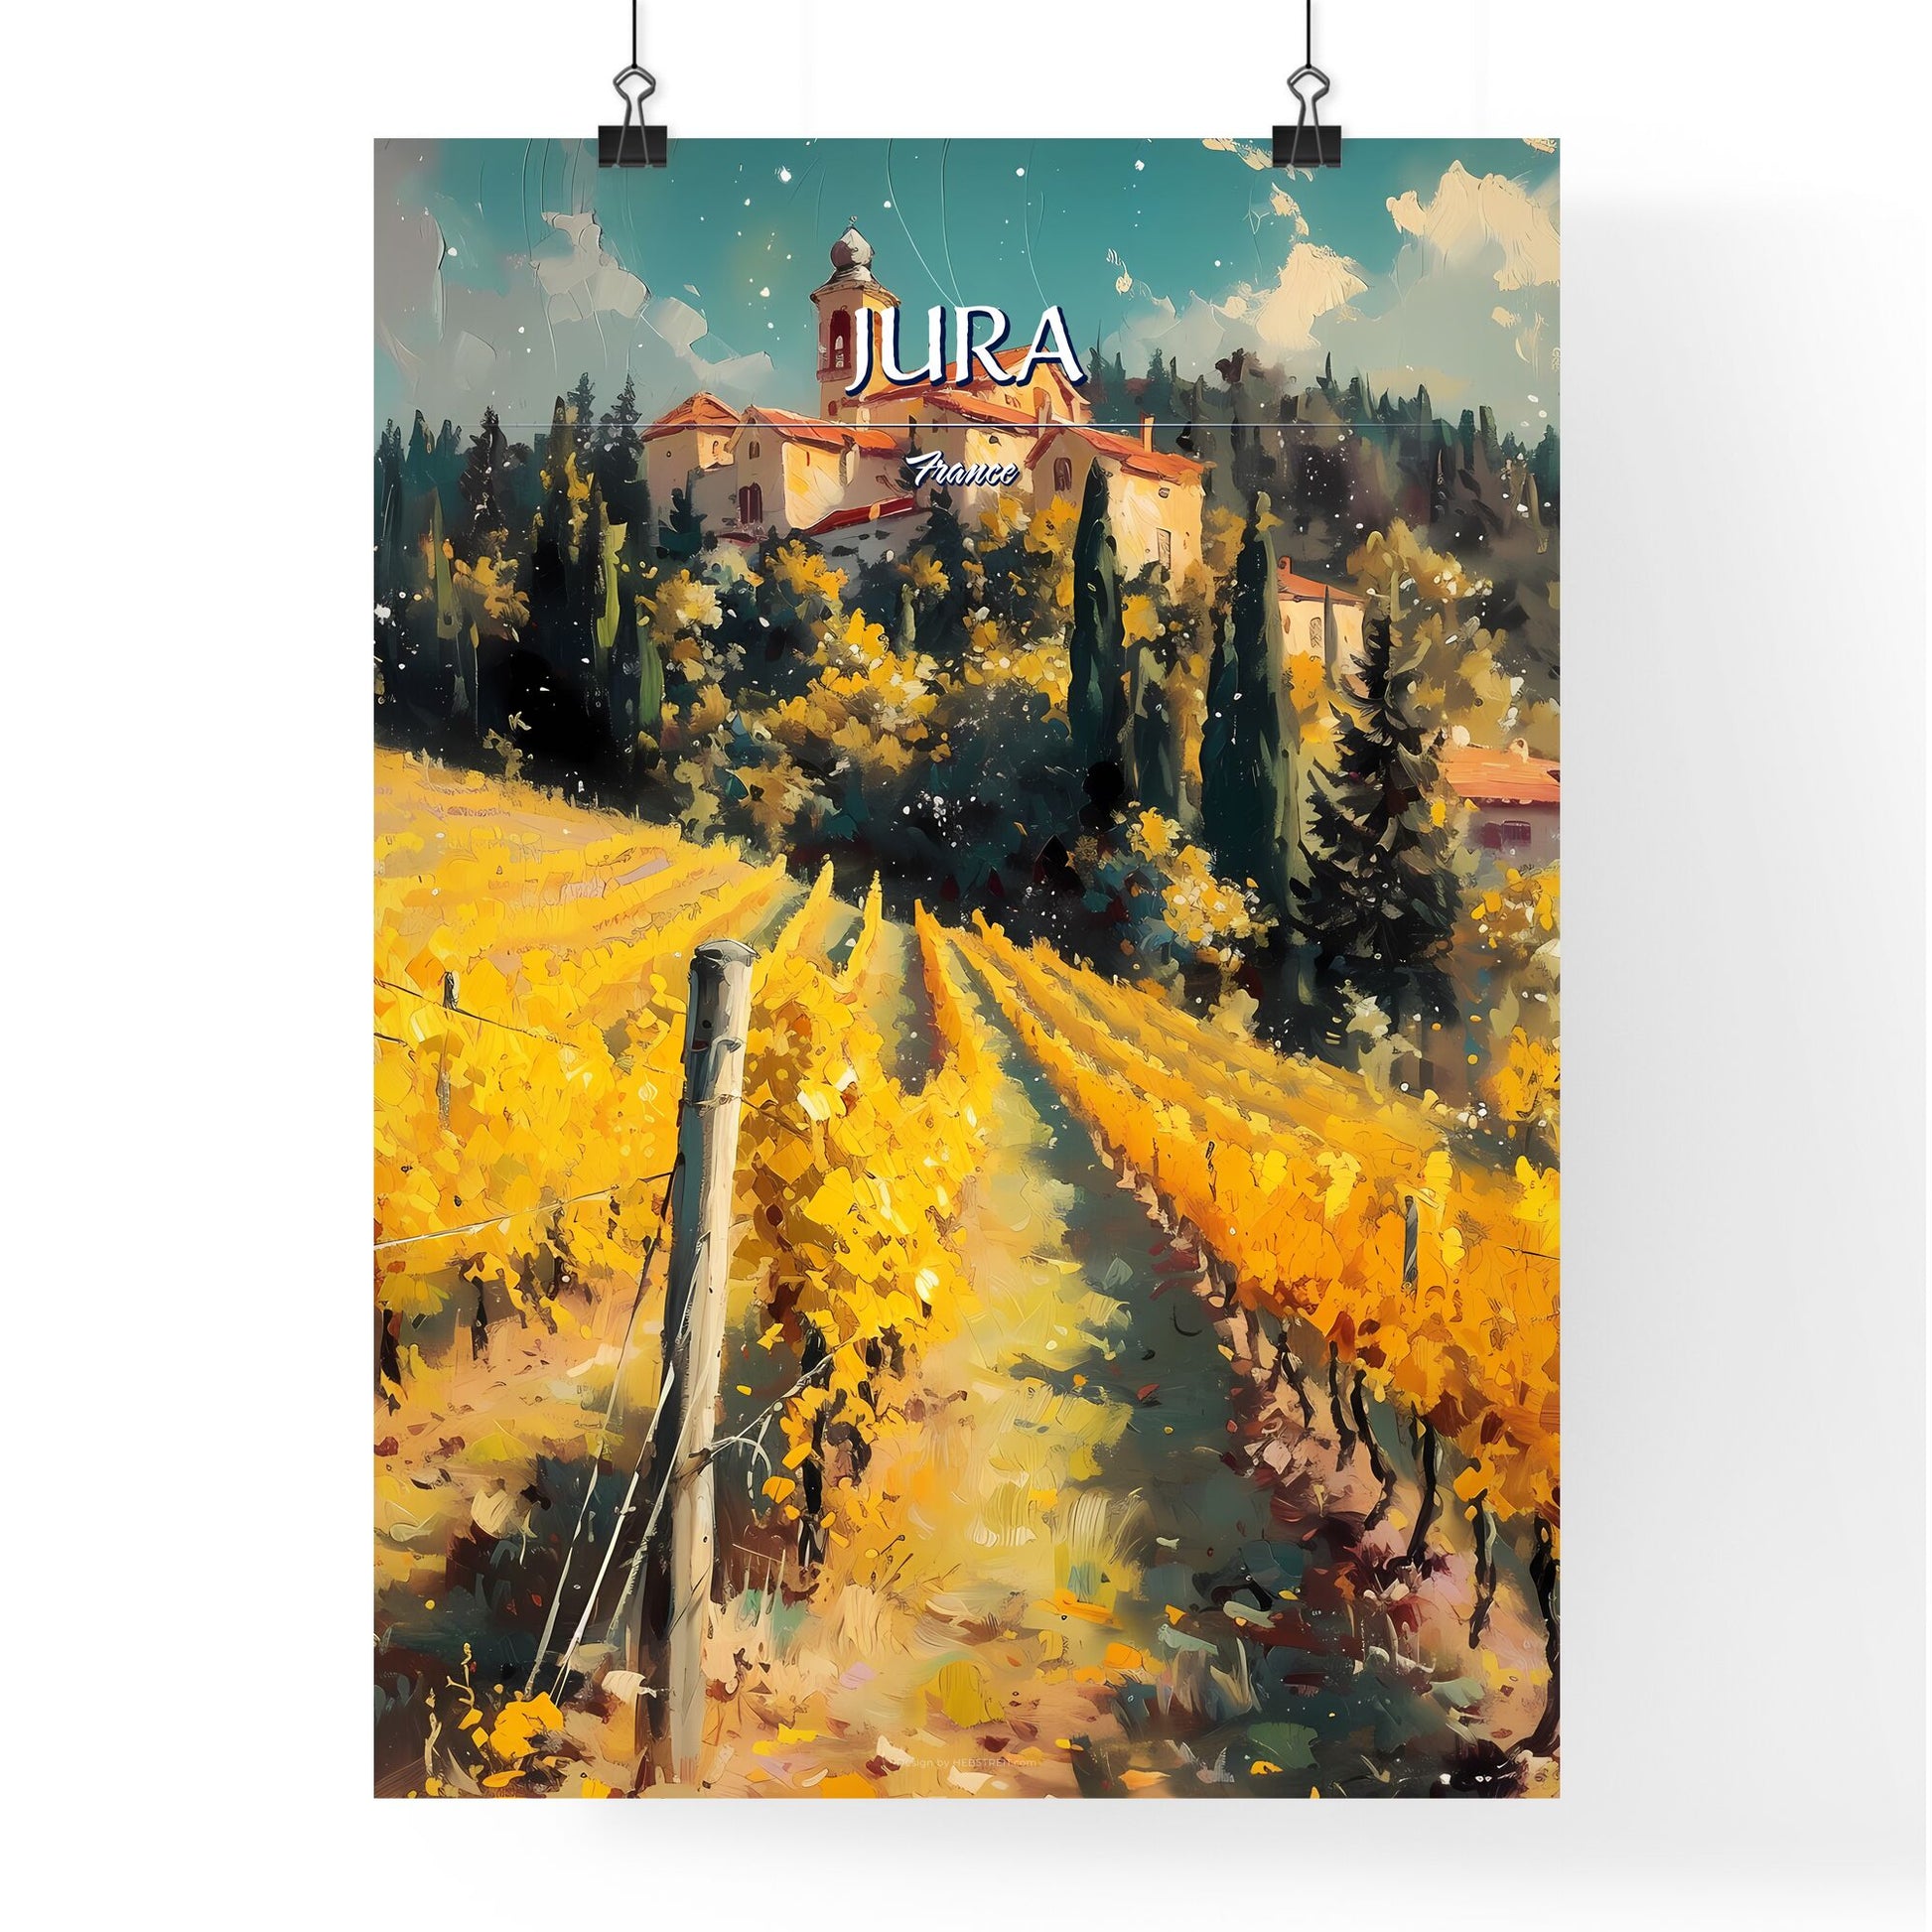 Jura, France - Art print of a house on a hill with trees and a vineyard Default Title